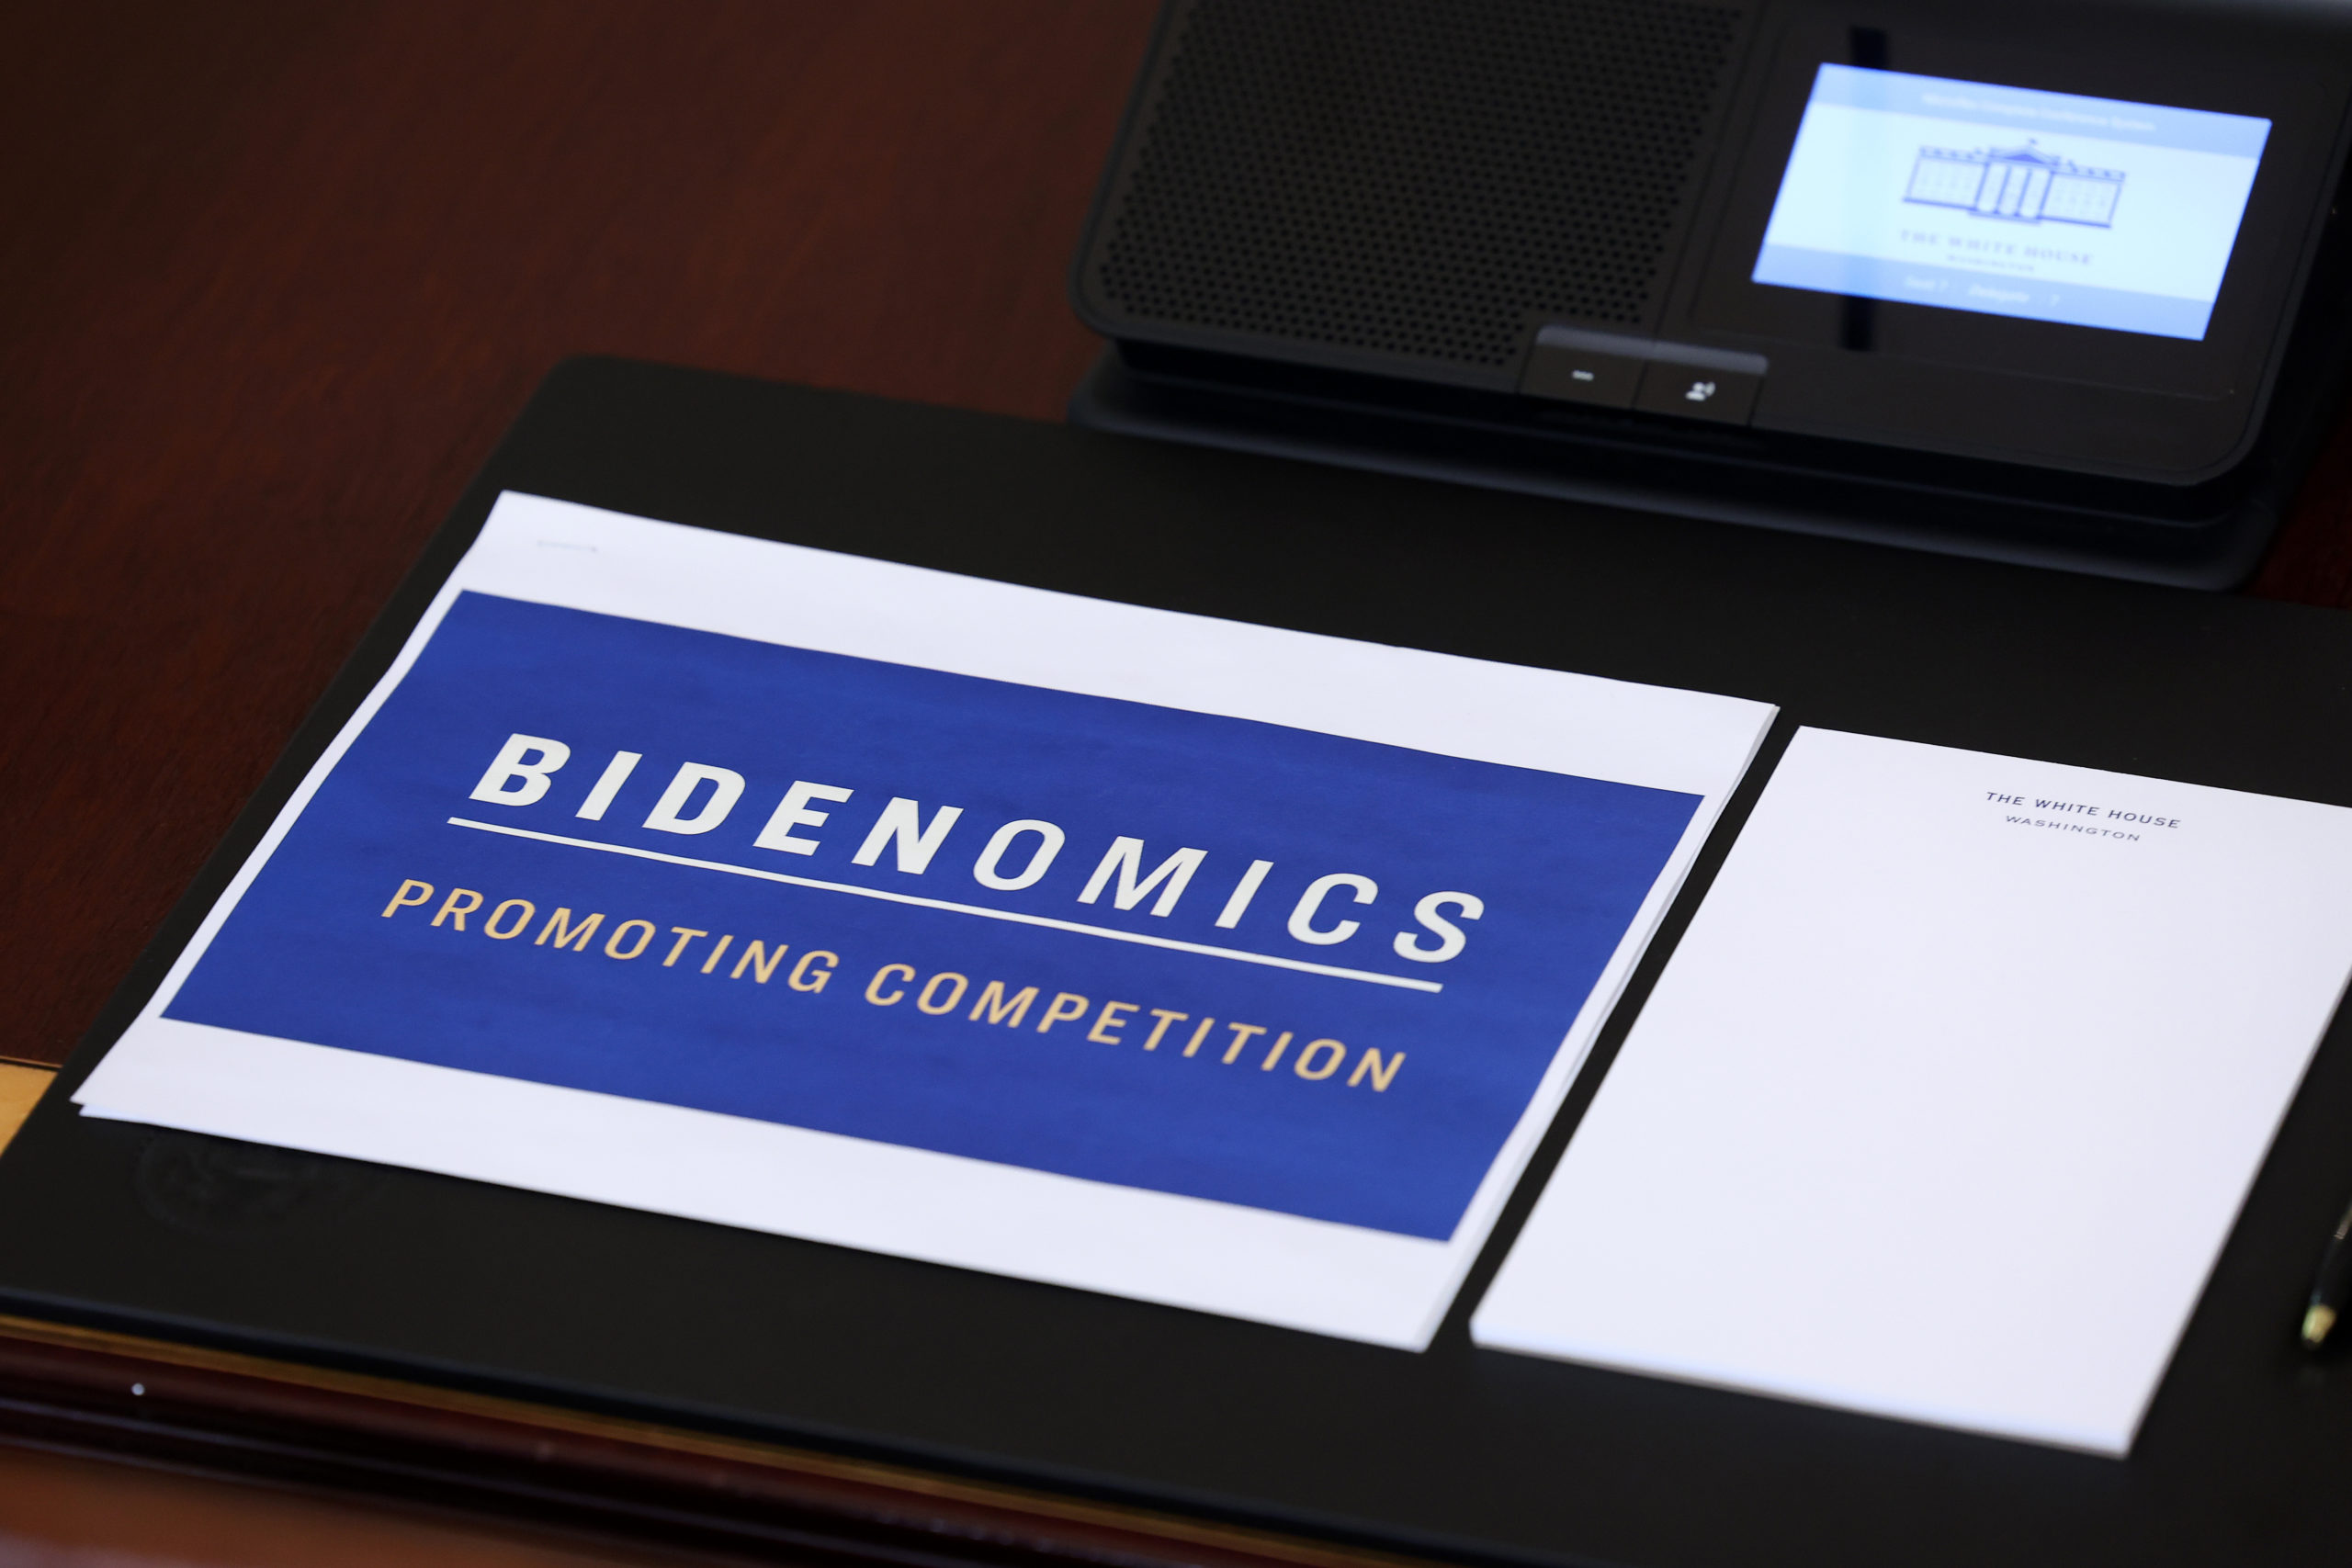 A stack of documents outlining U.S. President Joe Biden's "Bidenomics" economic plan is seen on a table during a meeting of the Competition Council in the State Dinning Room at the White House on July 19, 2023 in Washington, DC. Biden announced new actions aimed at increasing economic competition and strengthening entrepreneurs and small businesses. (Photo by Kevin Dietsch/Getty Images)